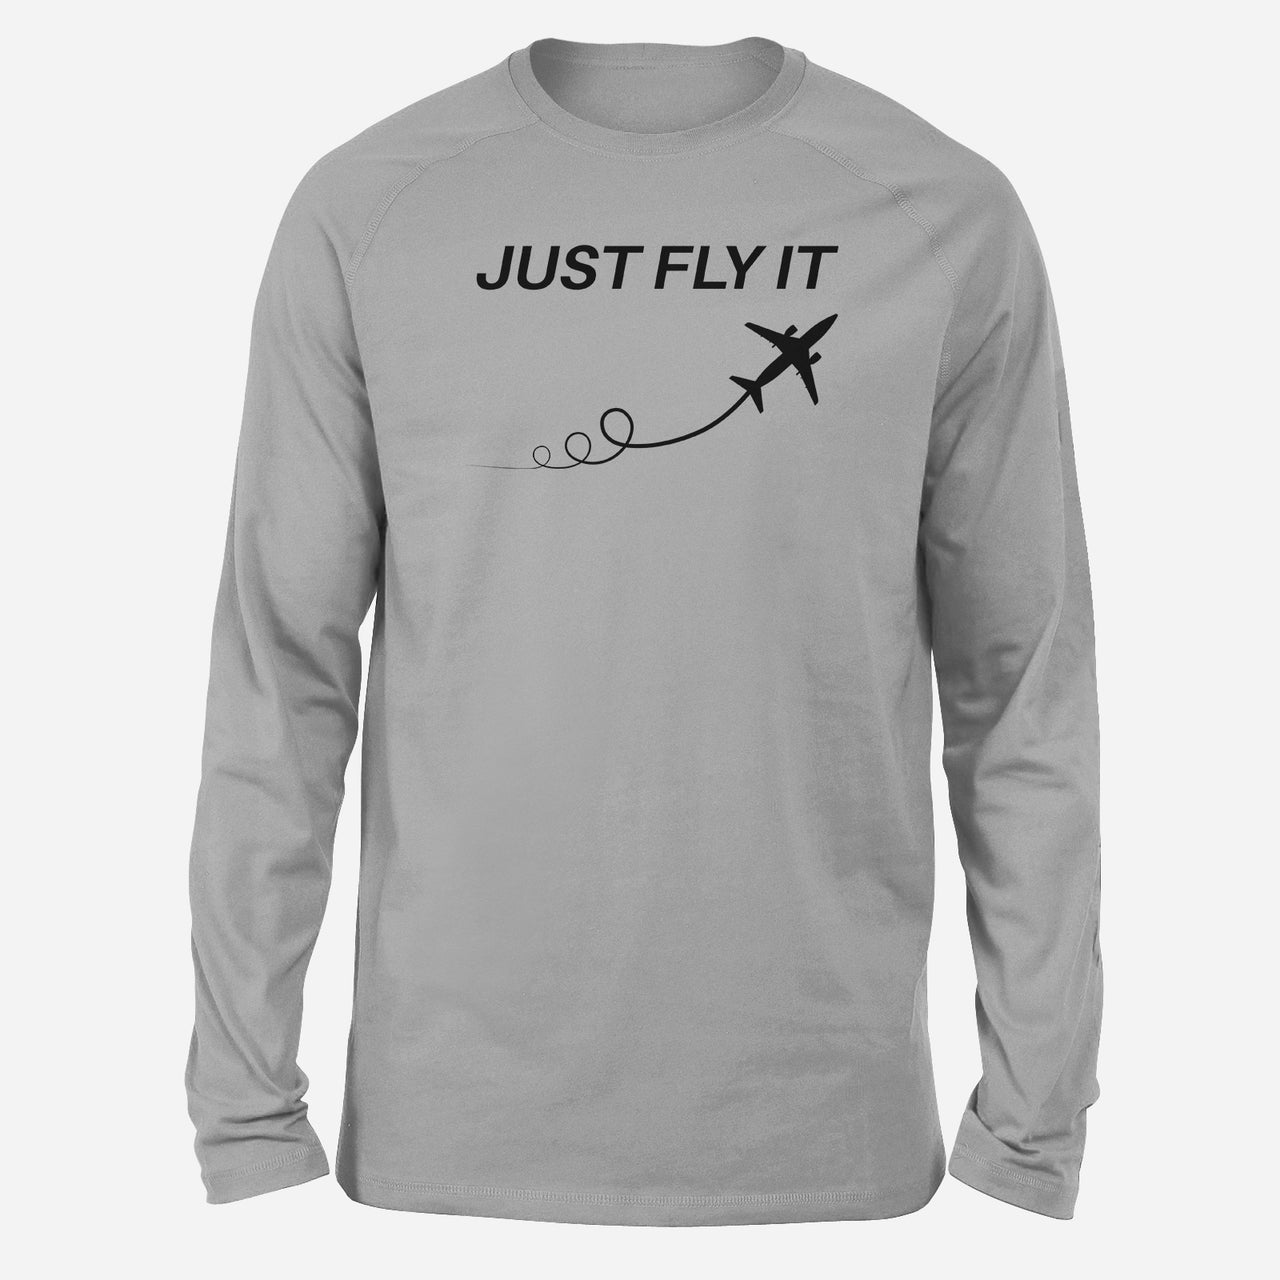 Just Fly It Designed Long-Sleeve T-Shirts